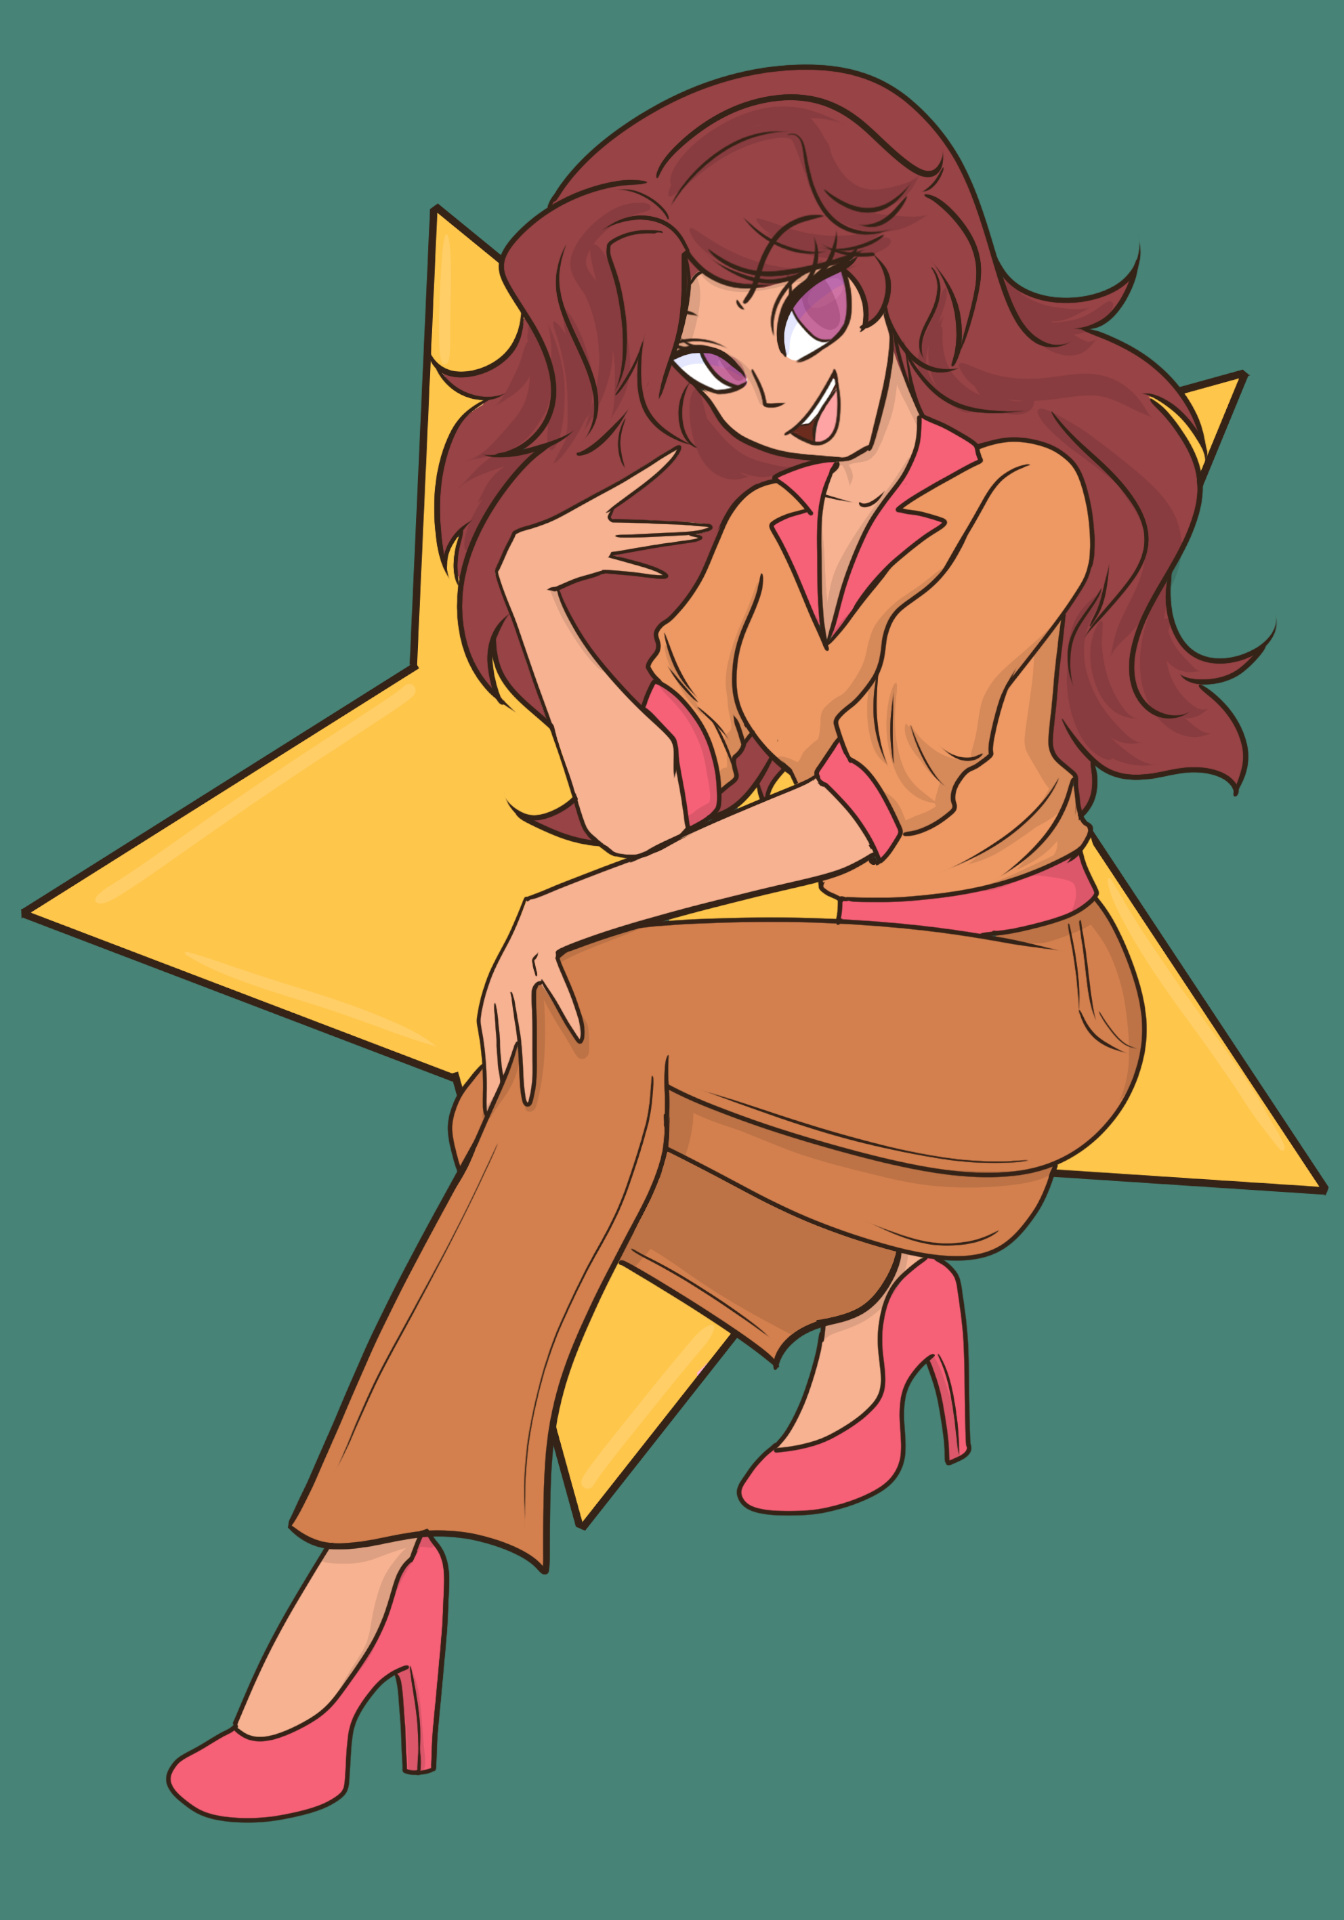 Illustration of woman with yellow star in background